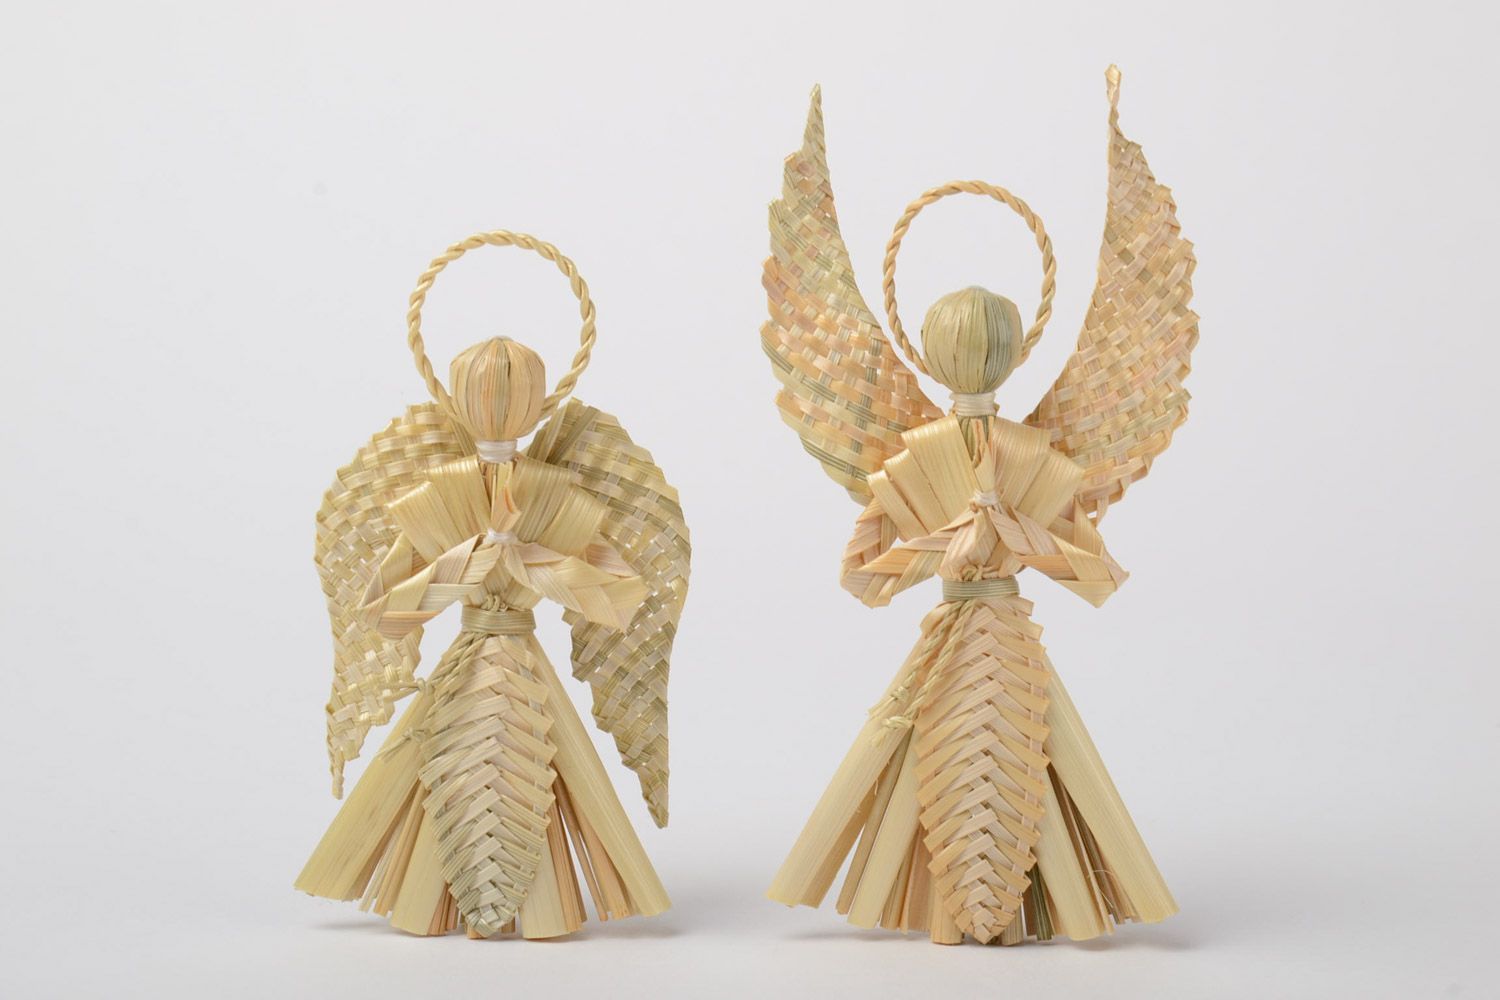 Set of 2 handmade decorative wall hanging figurines of angels woven of straw photo 2